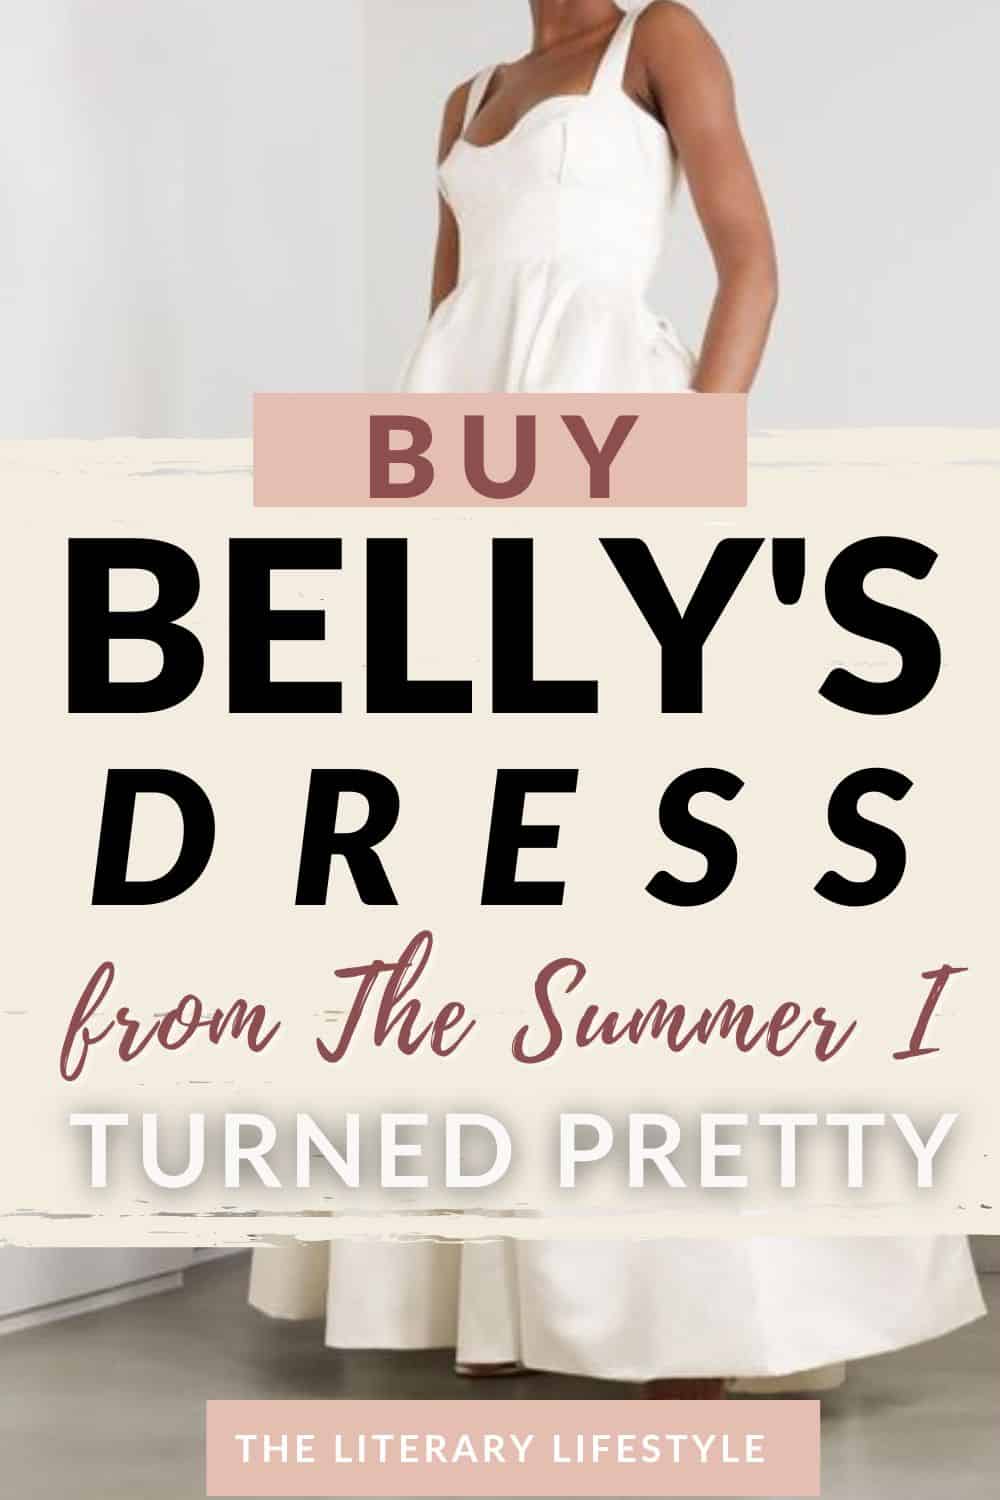 buy belly's debutante dress by emilia wickstead from the summer i turned pretty